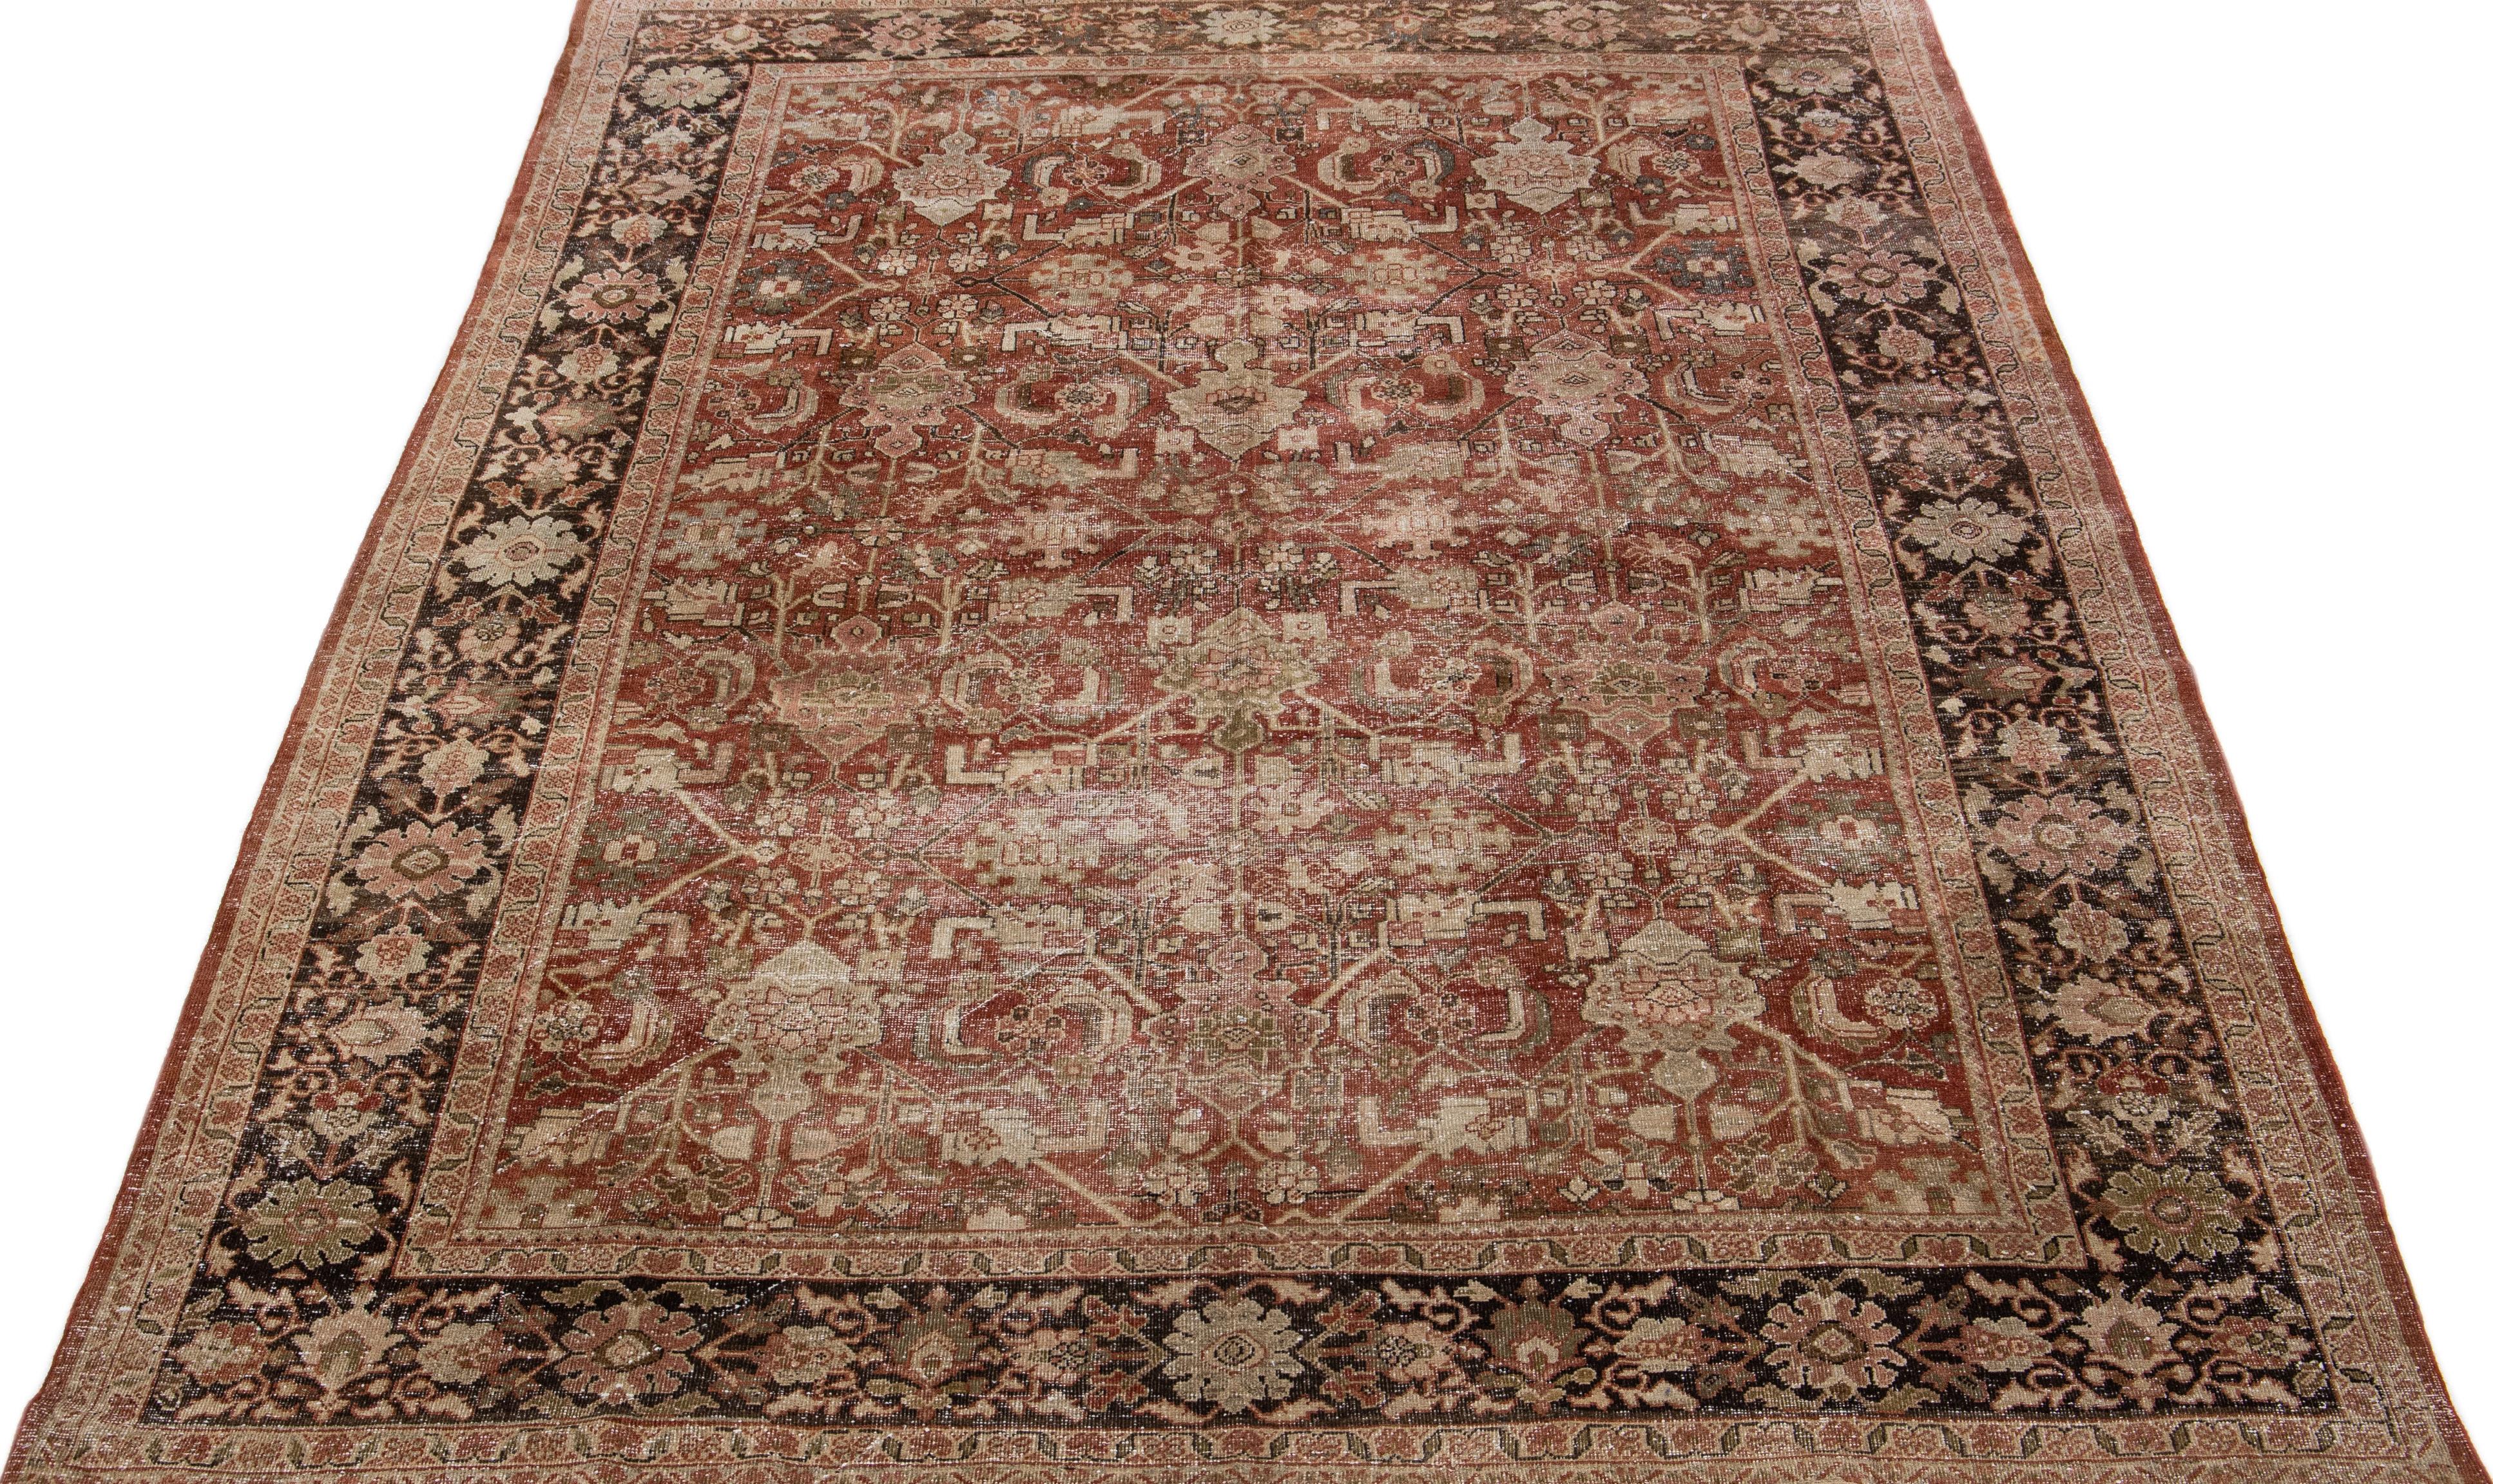 Beautiful hand-knotted antique mahal wool rug with a red-rust color field. This Persian rug has brown and beige accent colors in an all-over floral design. 

This rug measures: 7'6